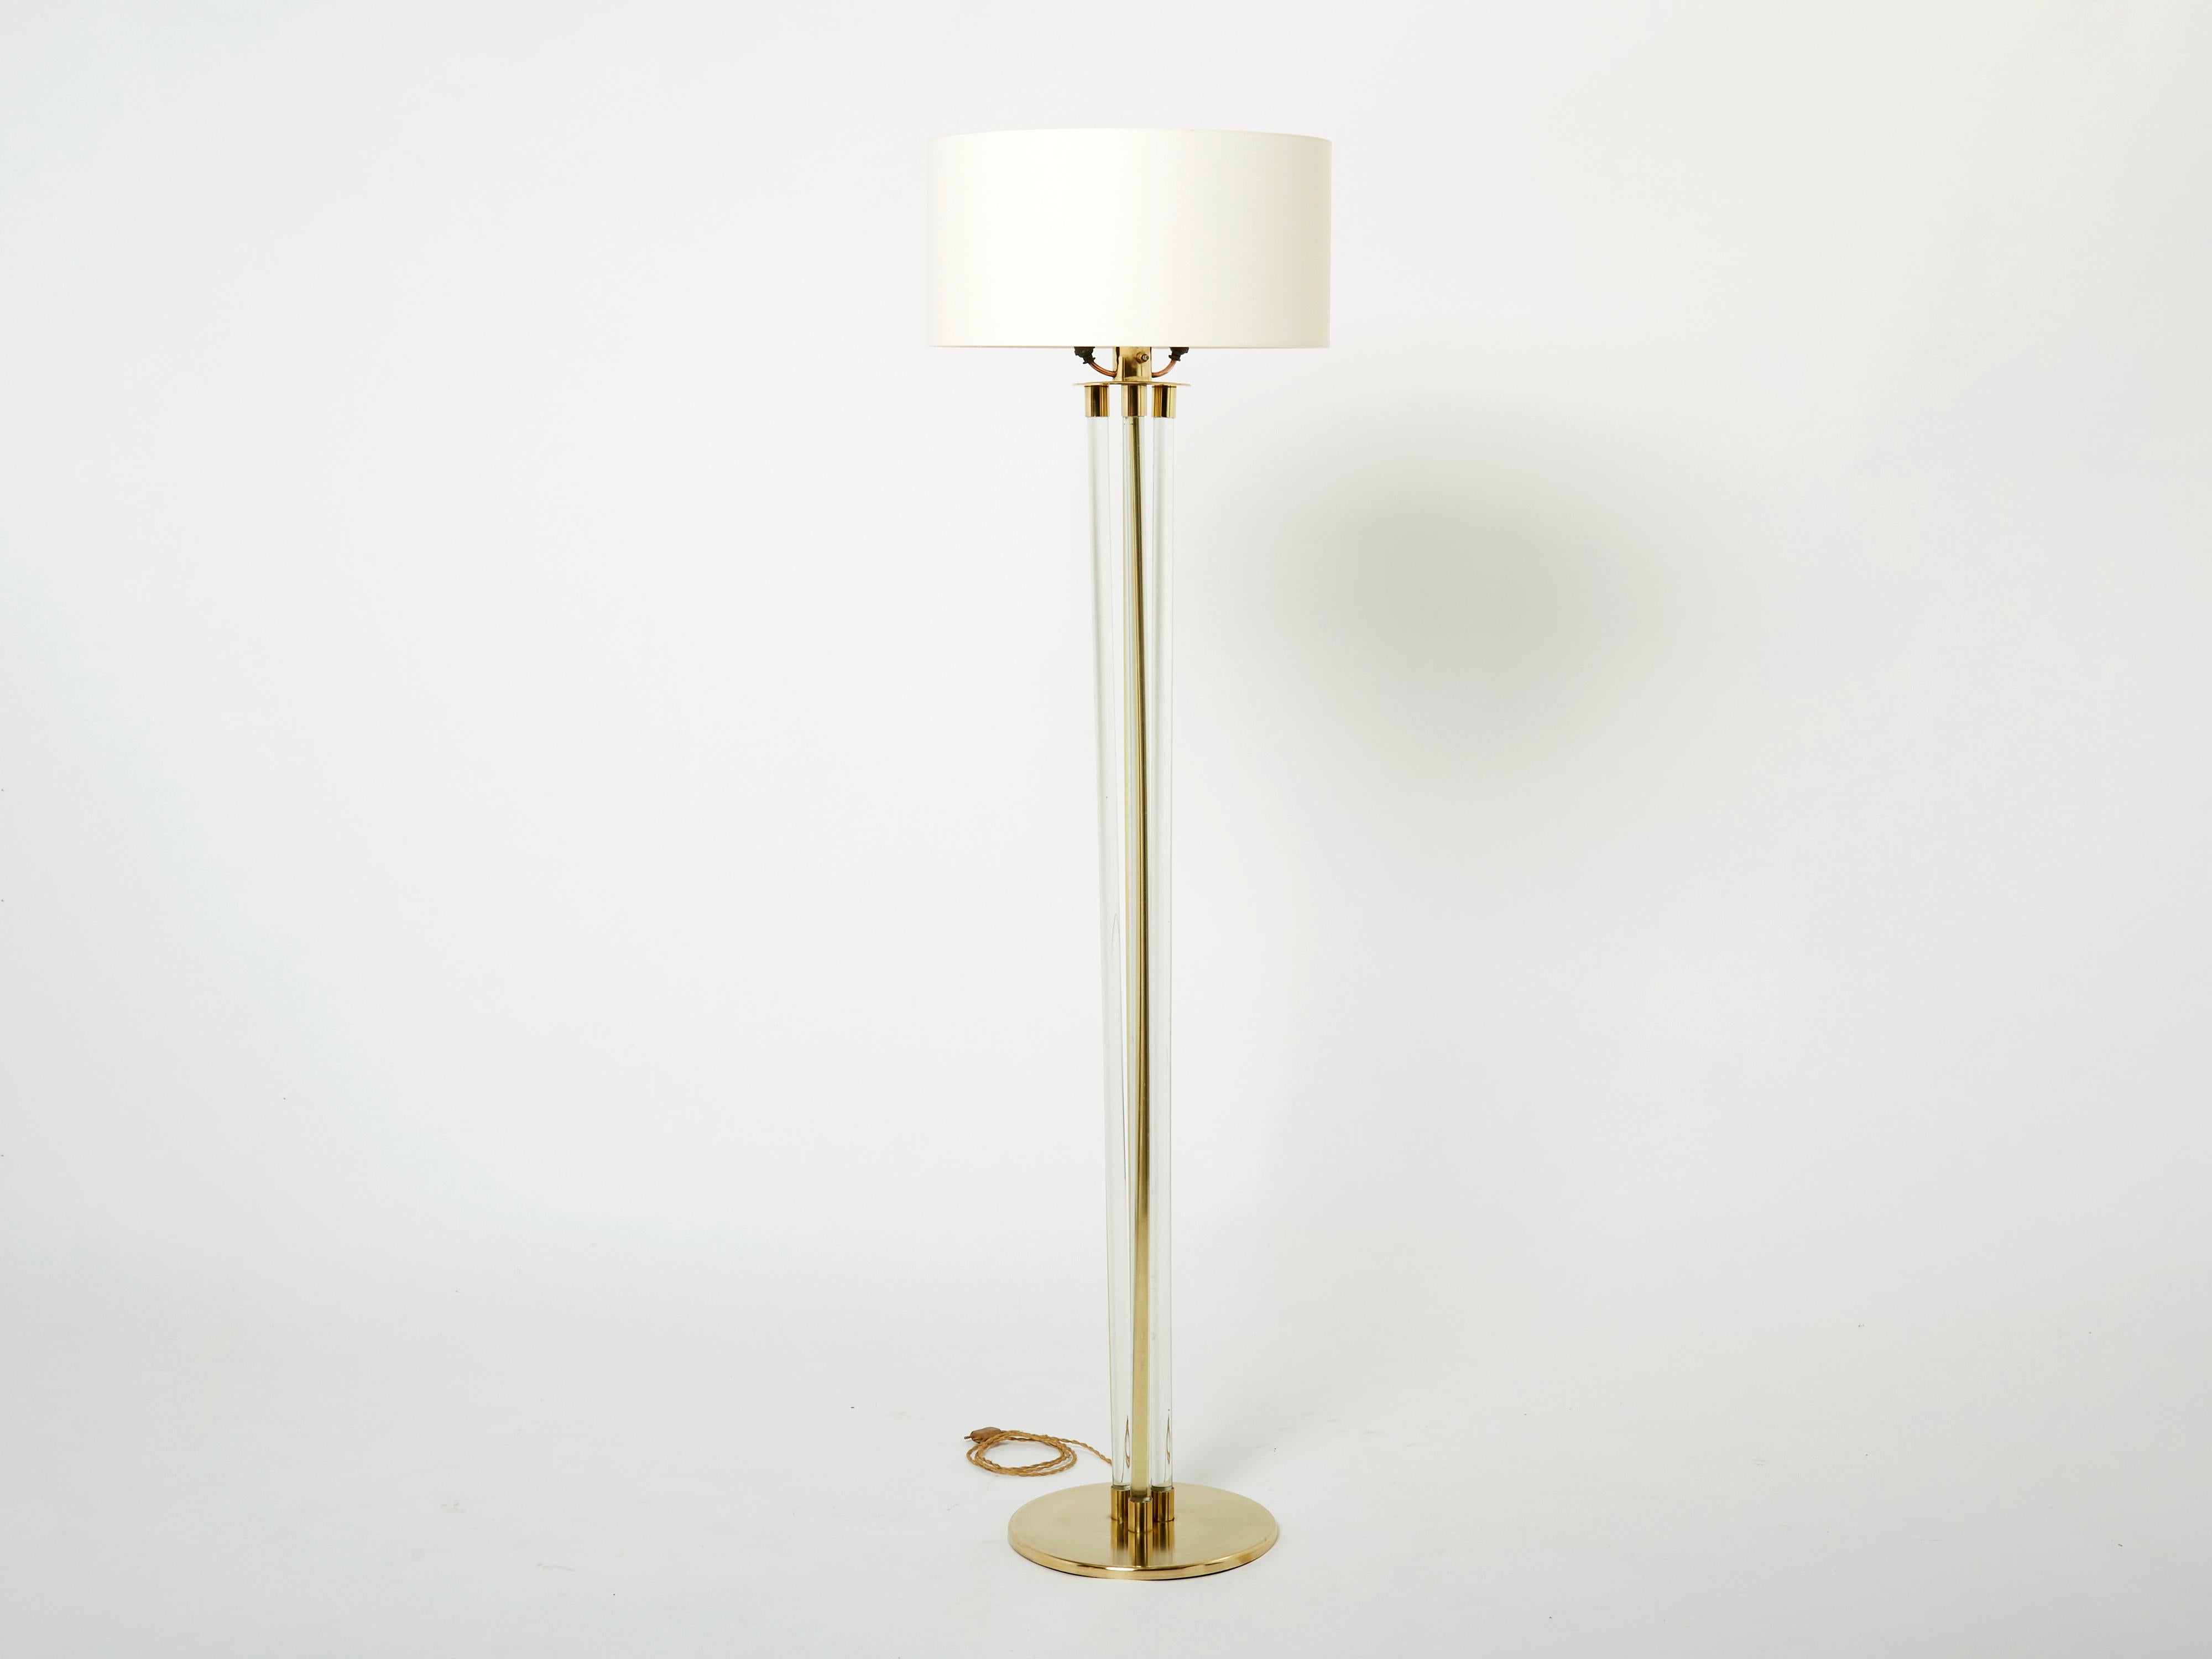 This beautiful Jacques Adnet floor lamp is sure to add an element of French modernism to any room in your home. It was designed and produced by Jacques Adnet in the early 1950s. With a solid brass structure and rounded feet, three lucite tubes going